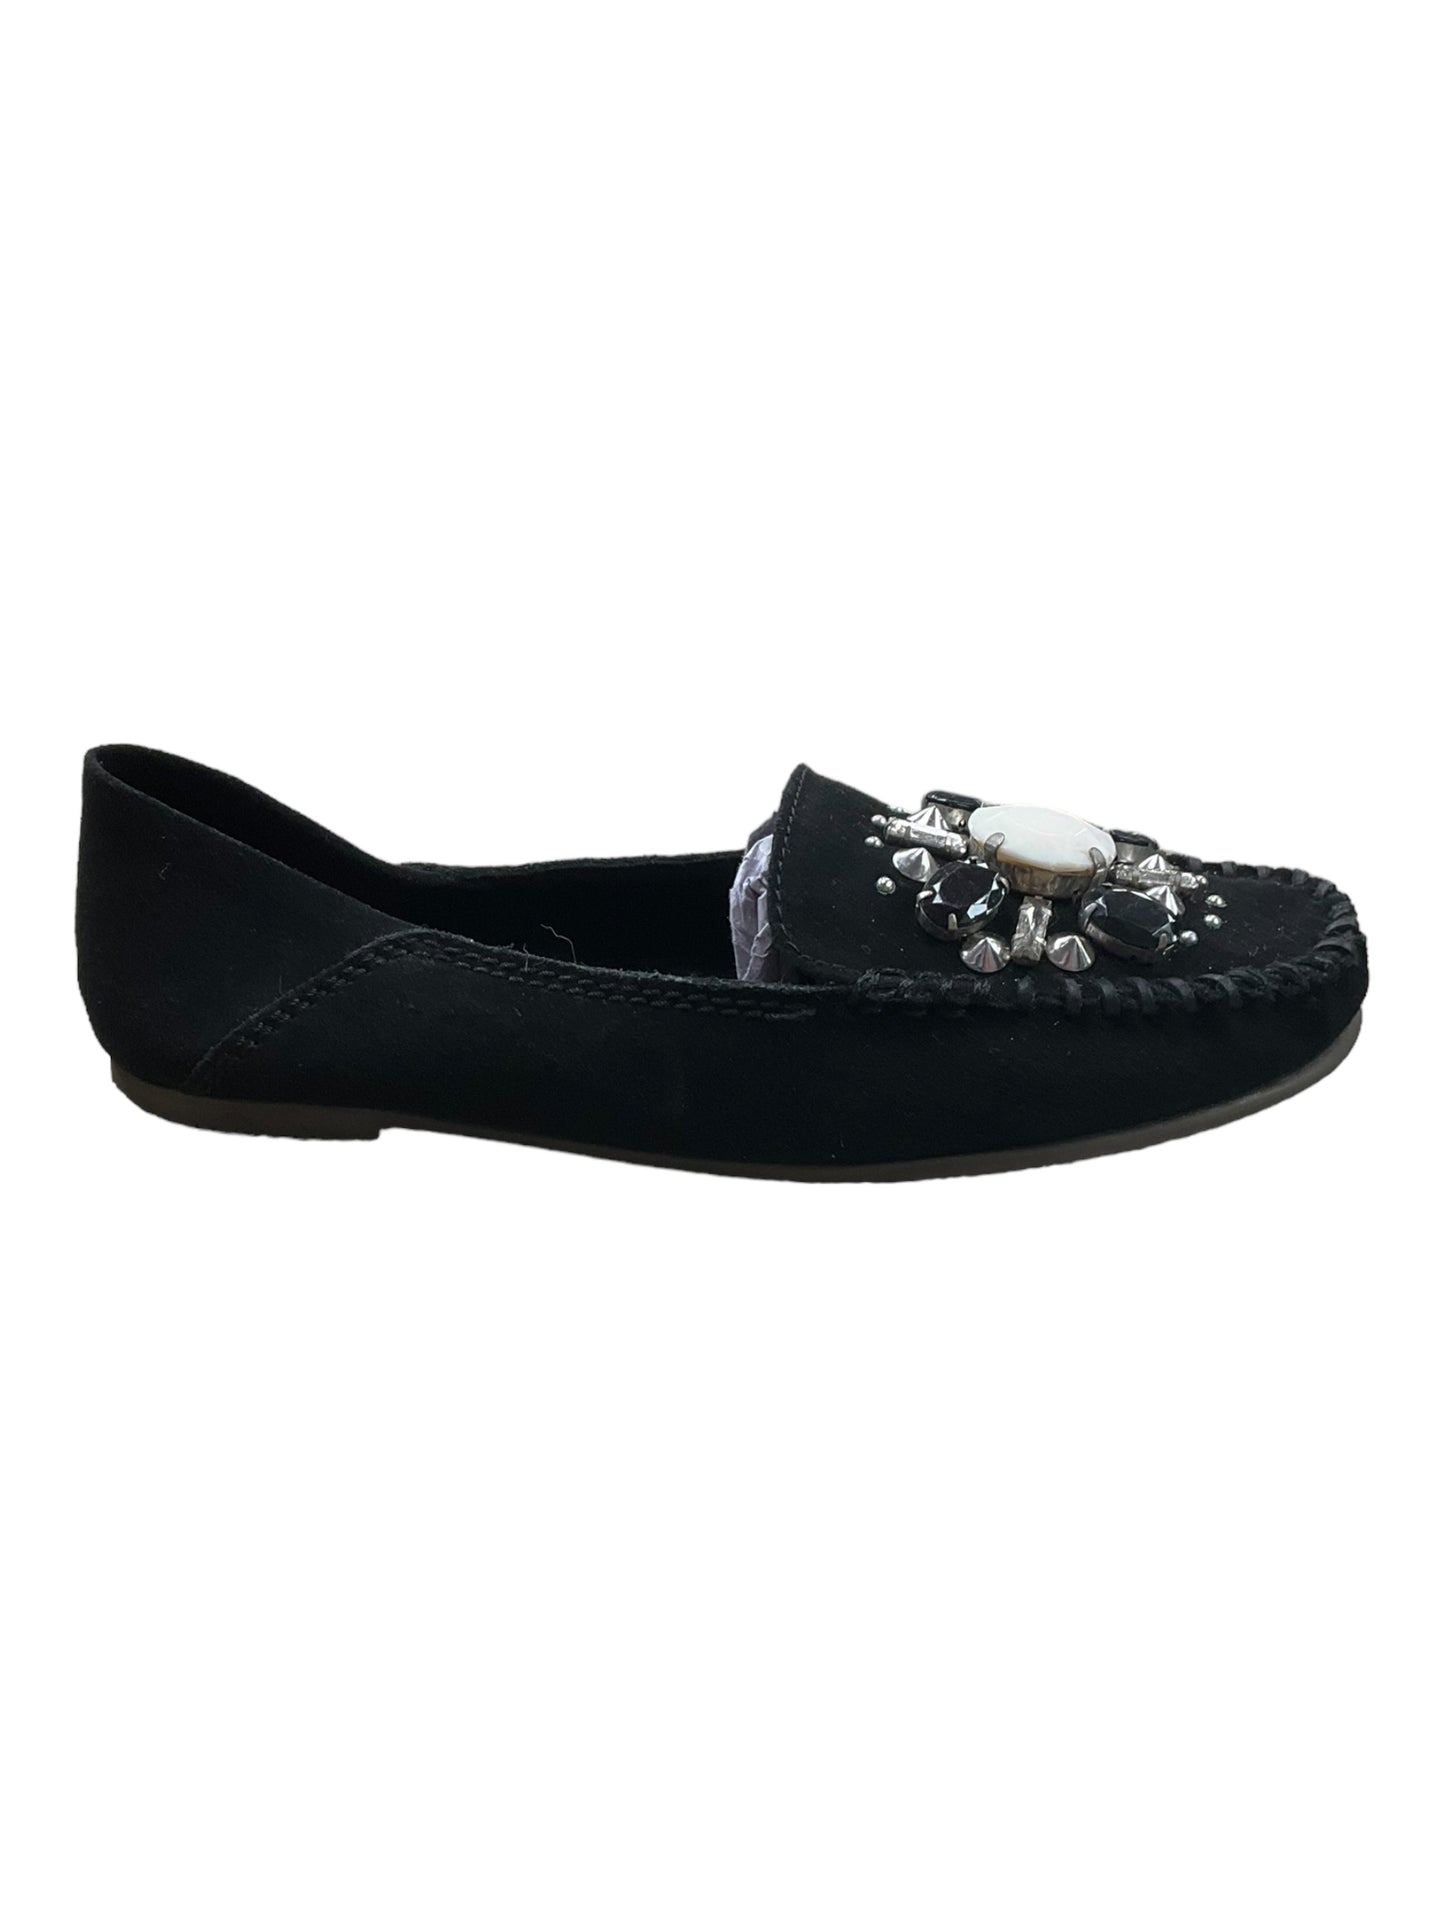 Shoes Flats Moccasin By Free People  Size: 7.5